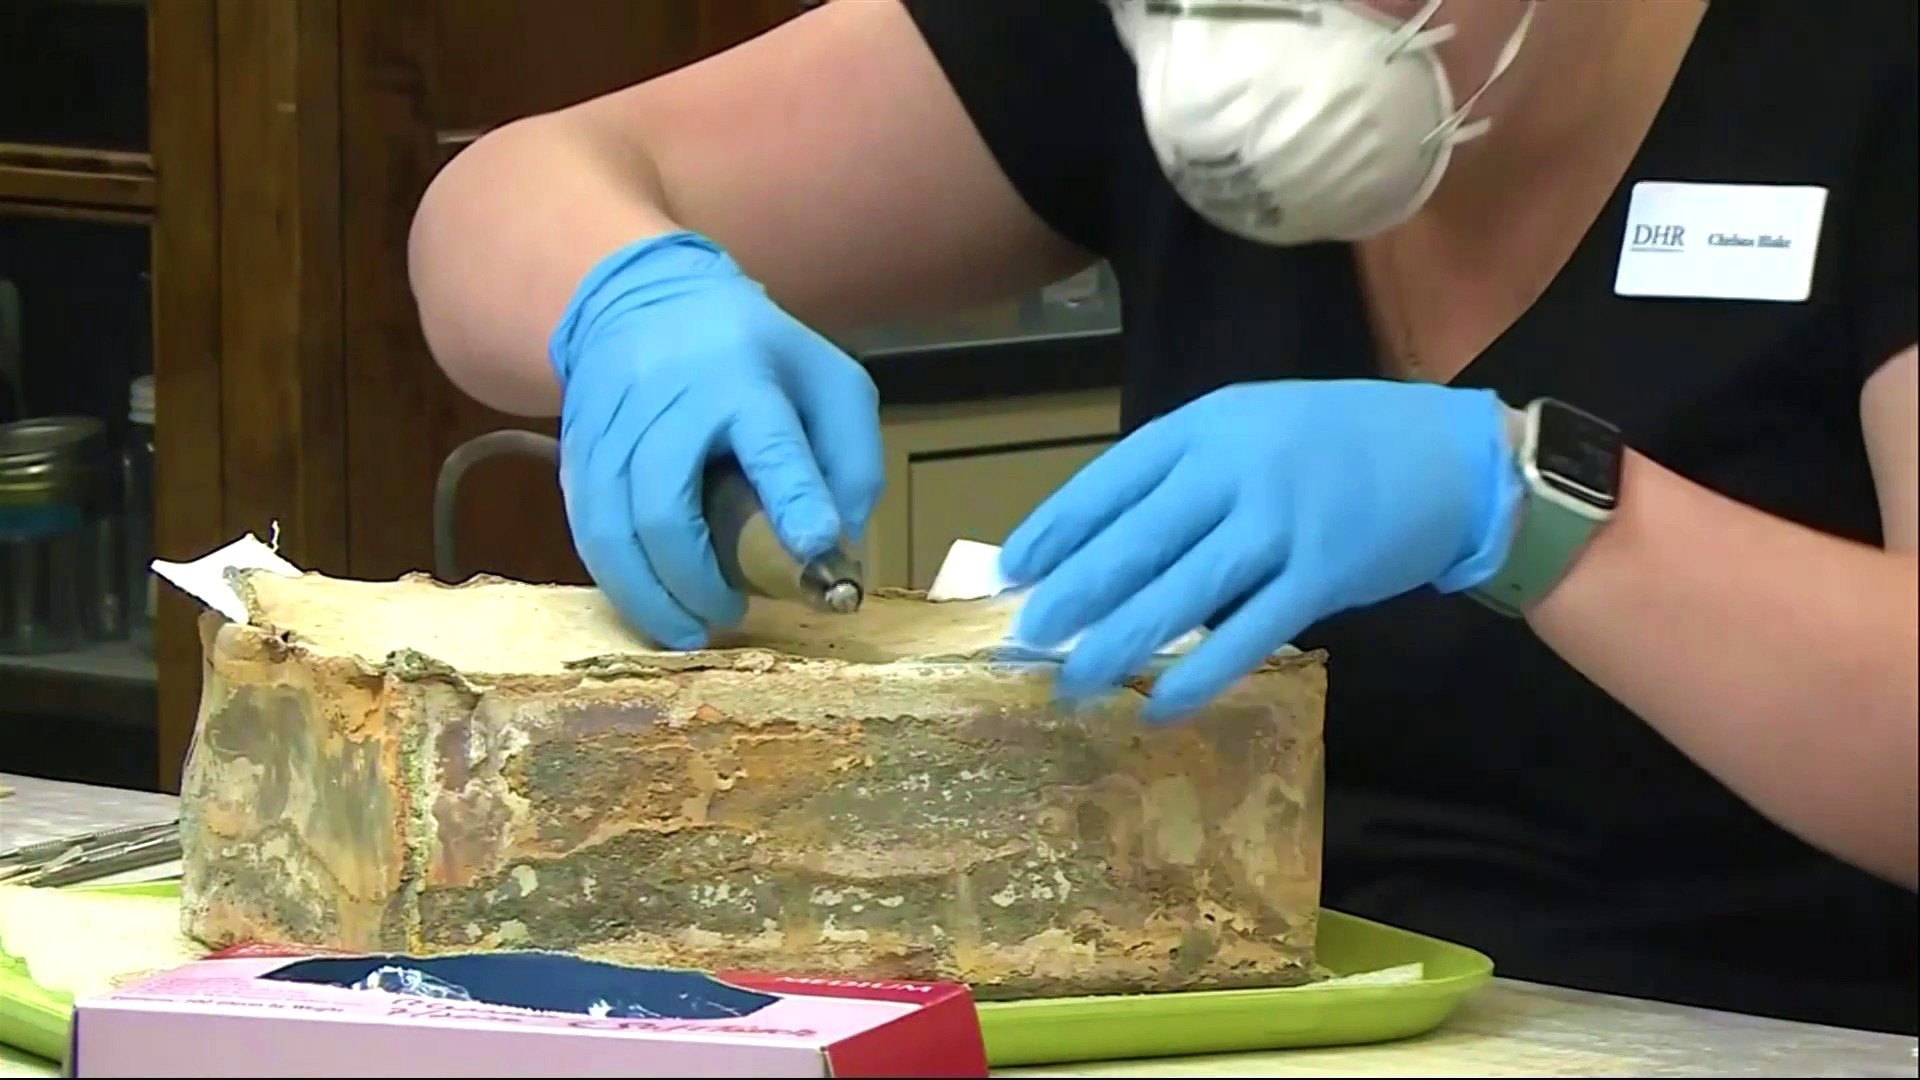 Watch TODAY Excerpt 2nd time capsule found at site of Robert E. Lee